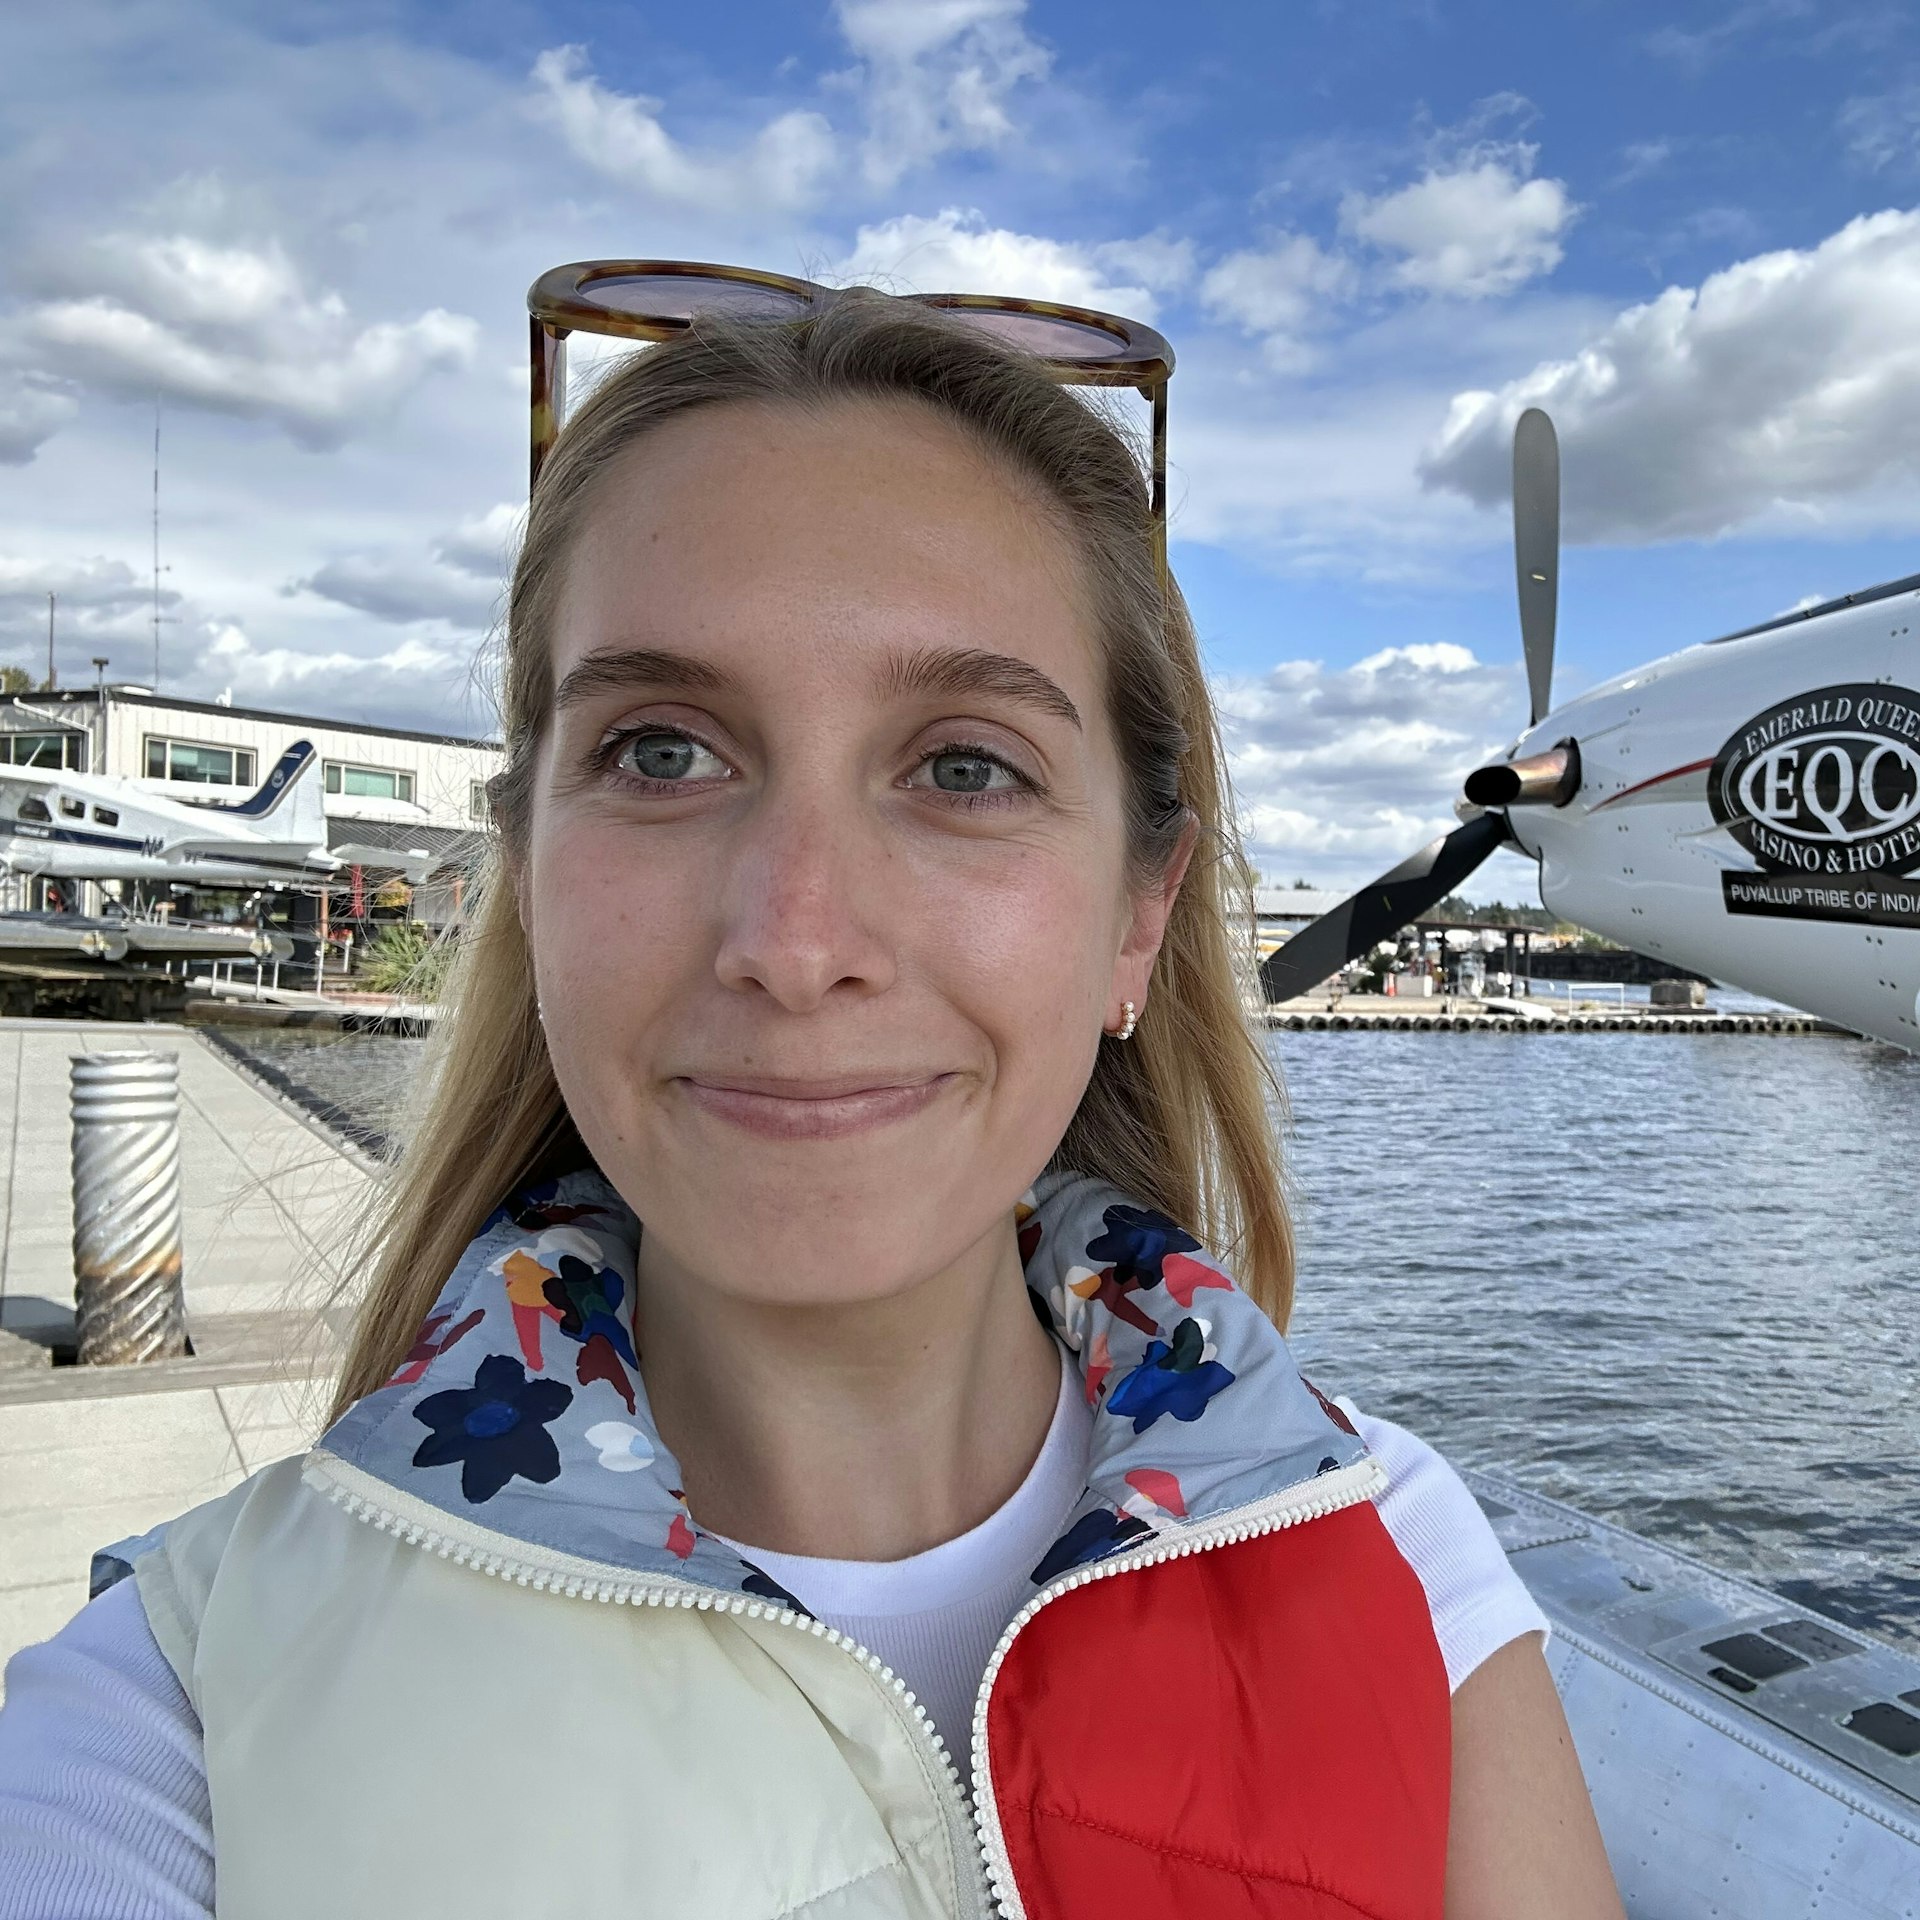 Ann Douglas Lott standing on a harbourside walkway, with the rear propeller of a seaplane behind